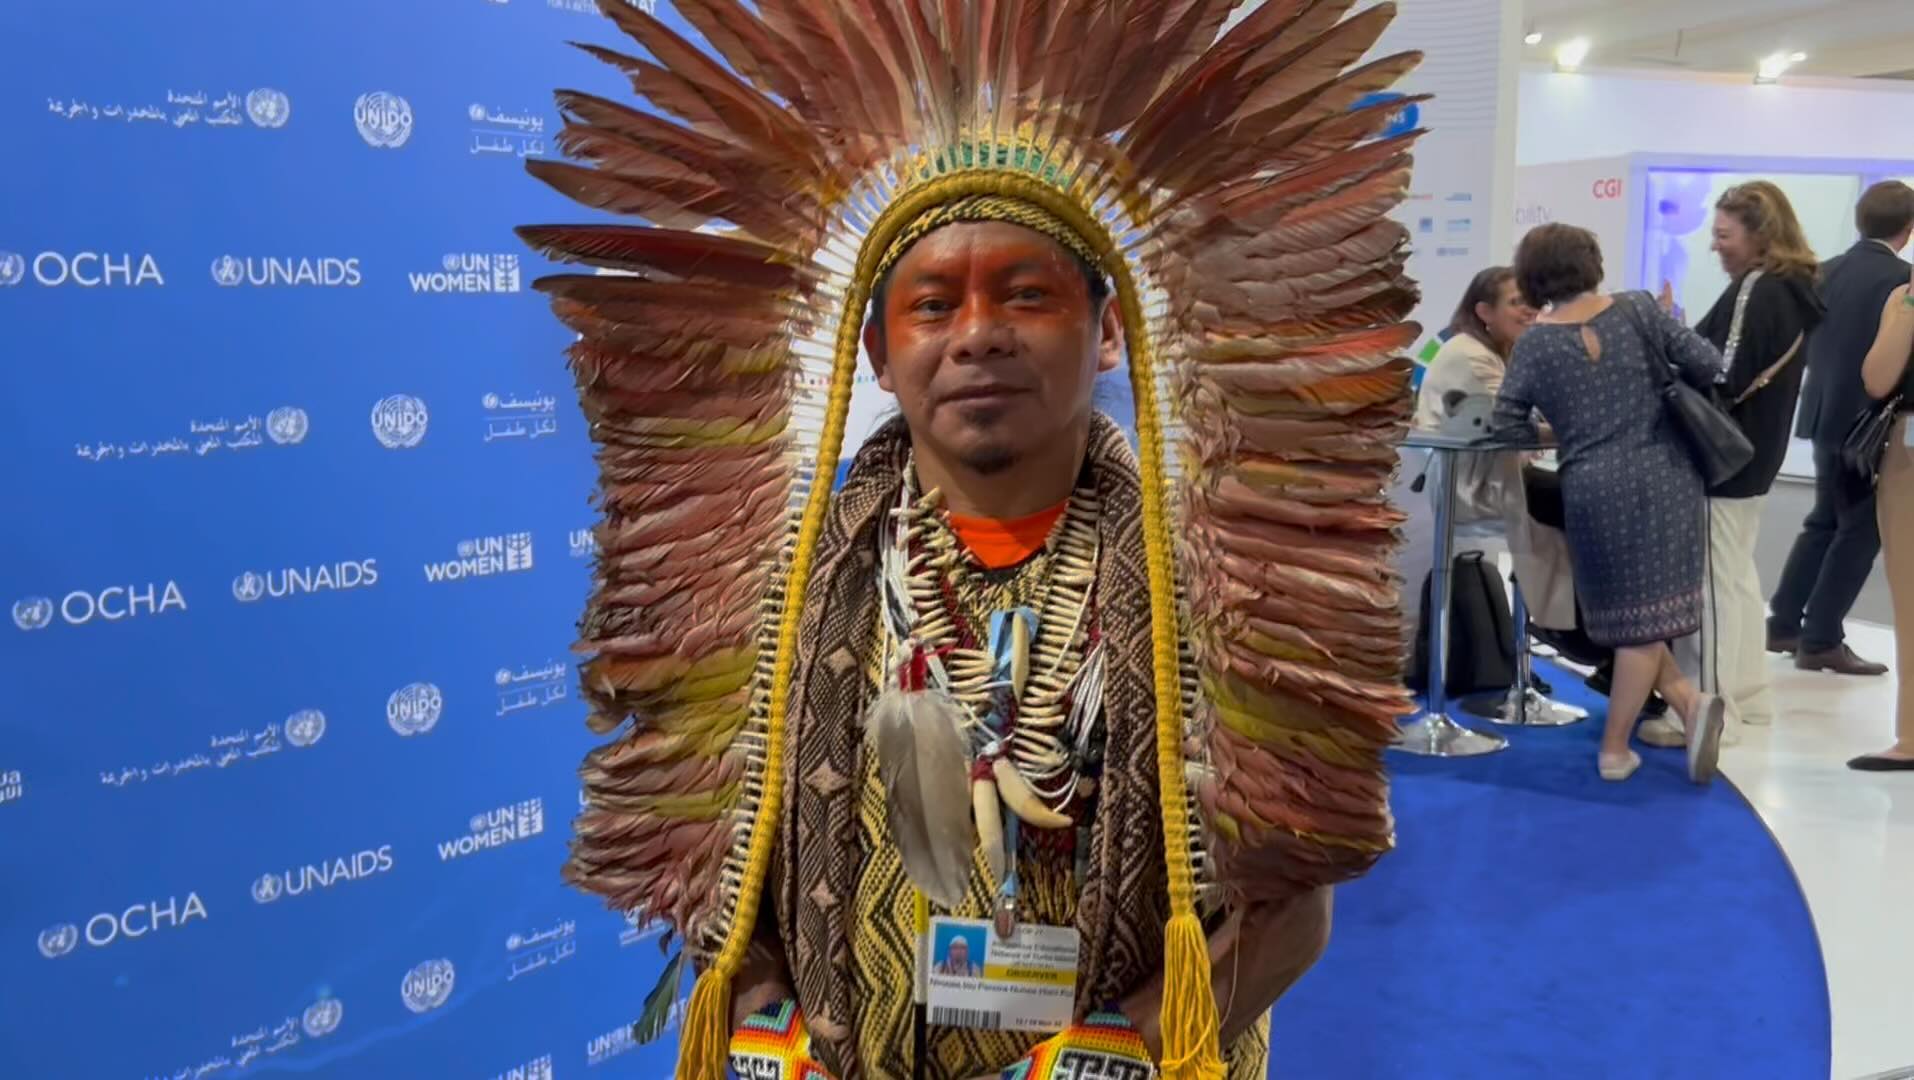 #COP27  - “a trade show where our lives are being negotiated” 

During my free time at #COP27 , I took interview of various young climate activists and environmentalists from various countries to amplify their voices.

Here is one of my interview with an Indigenous leader from Brazil 🇧🇷 fighting to save Amazon forests. 🥰🙏🏻